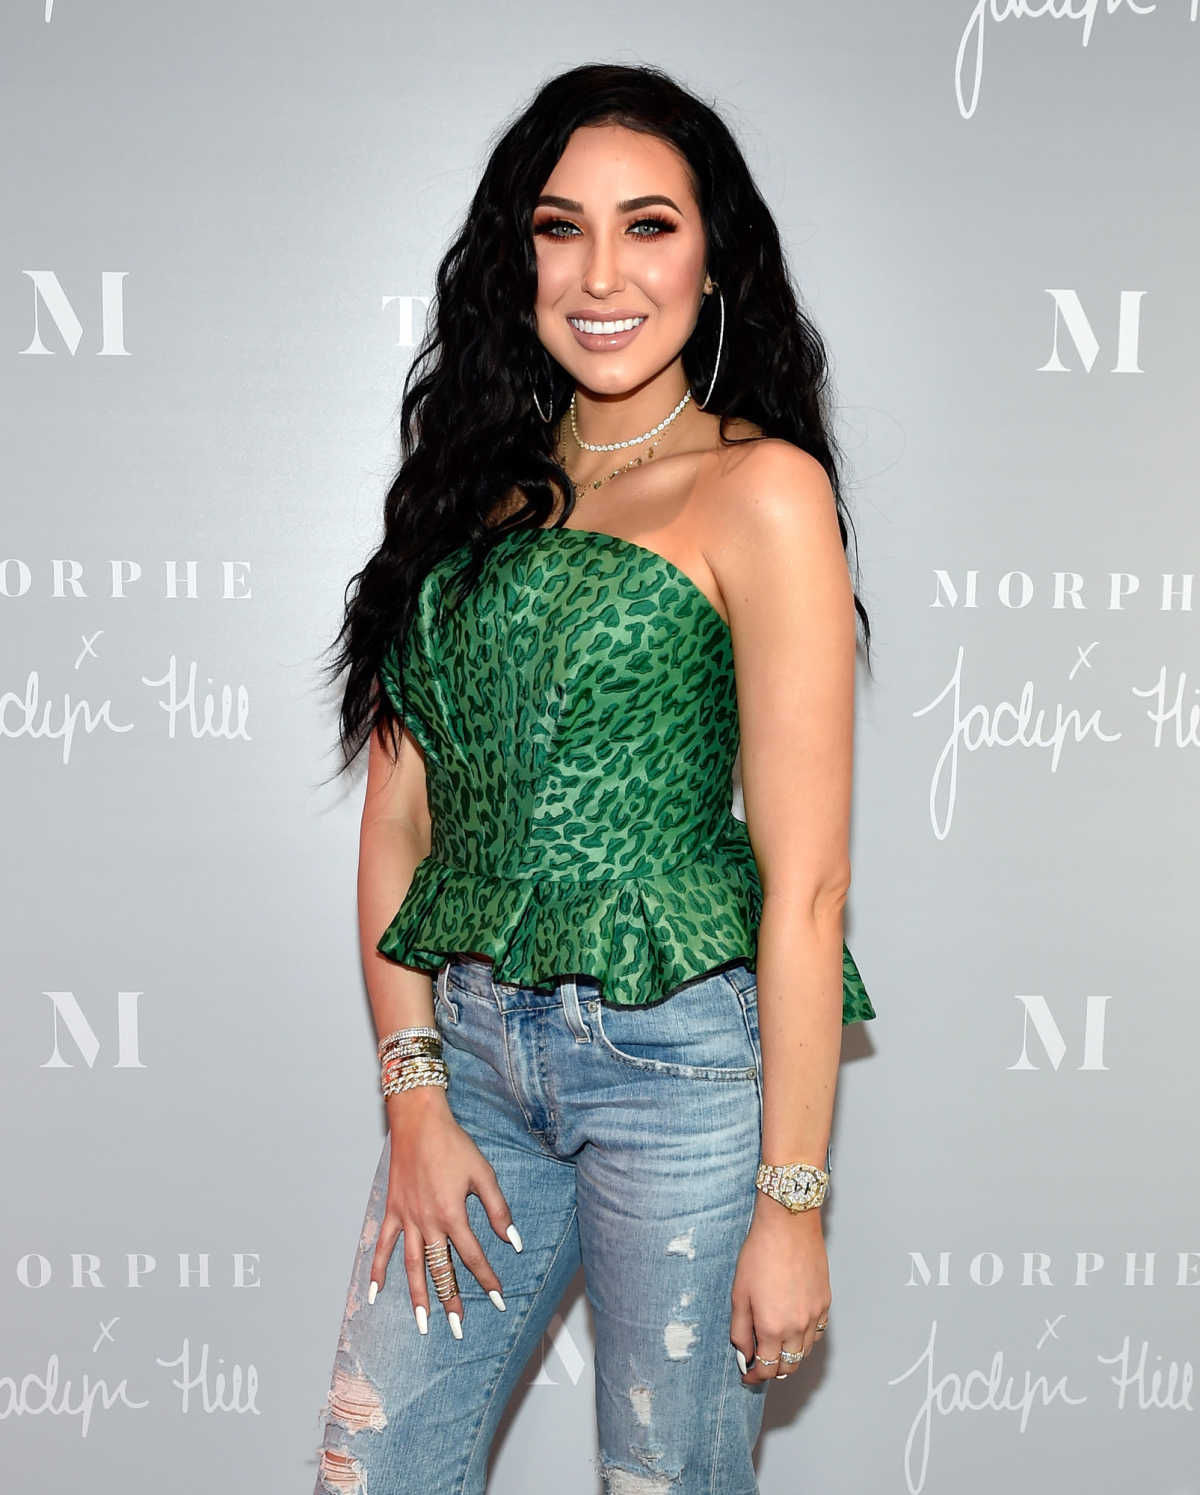 Jaclyn Hill Is Finally Speaking Out About Morphe Palette Controversy